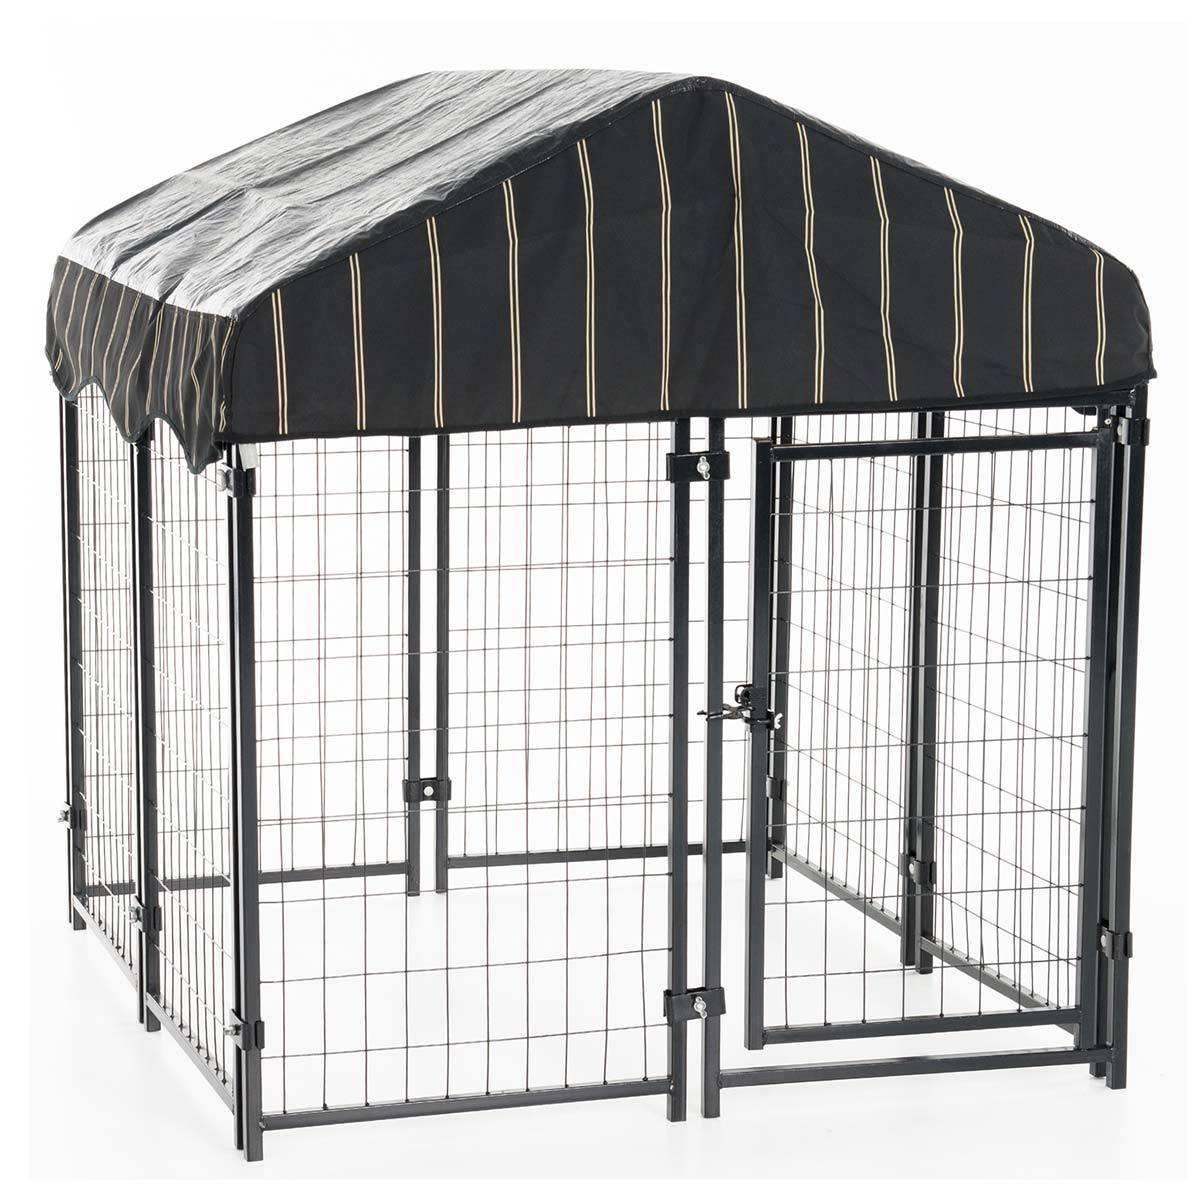 Outdoor Kennel with Weatherproof  Cover,  4 L x 4 W x 4.3ft H (1.2 L x 1.2 W x 1.3m H)